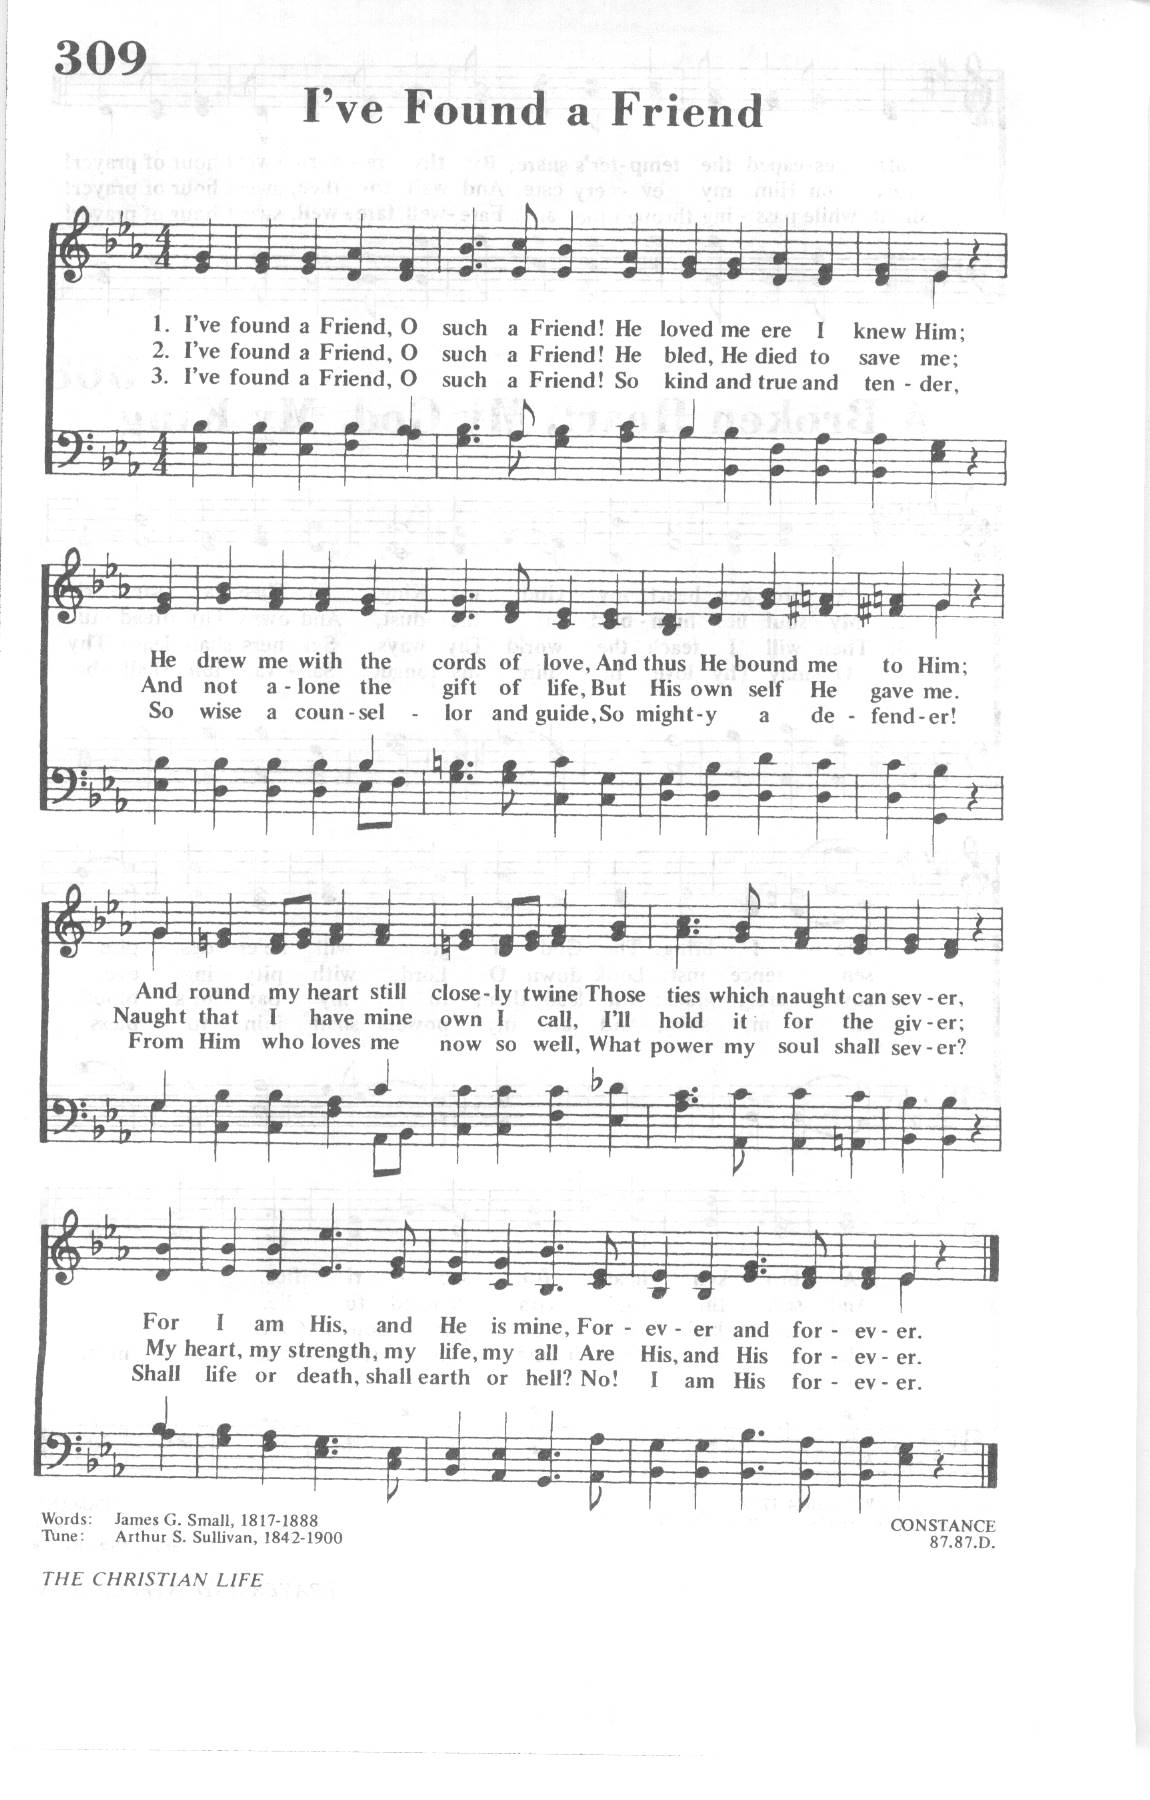 African Methodist Episcopal Church Hymnal page 319 | Hymnary.org